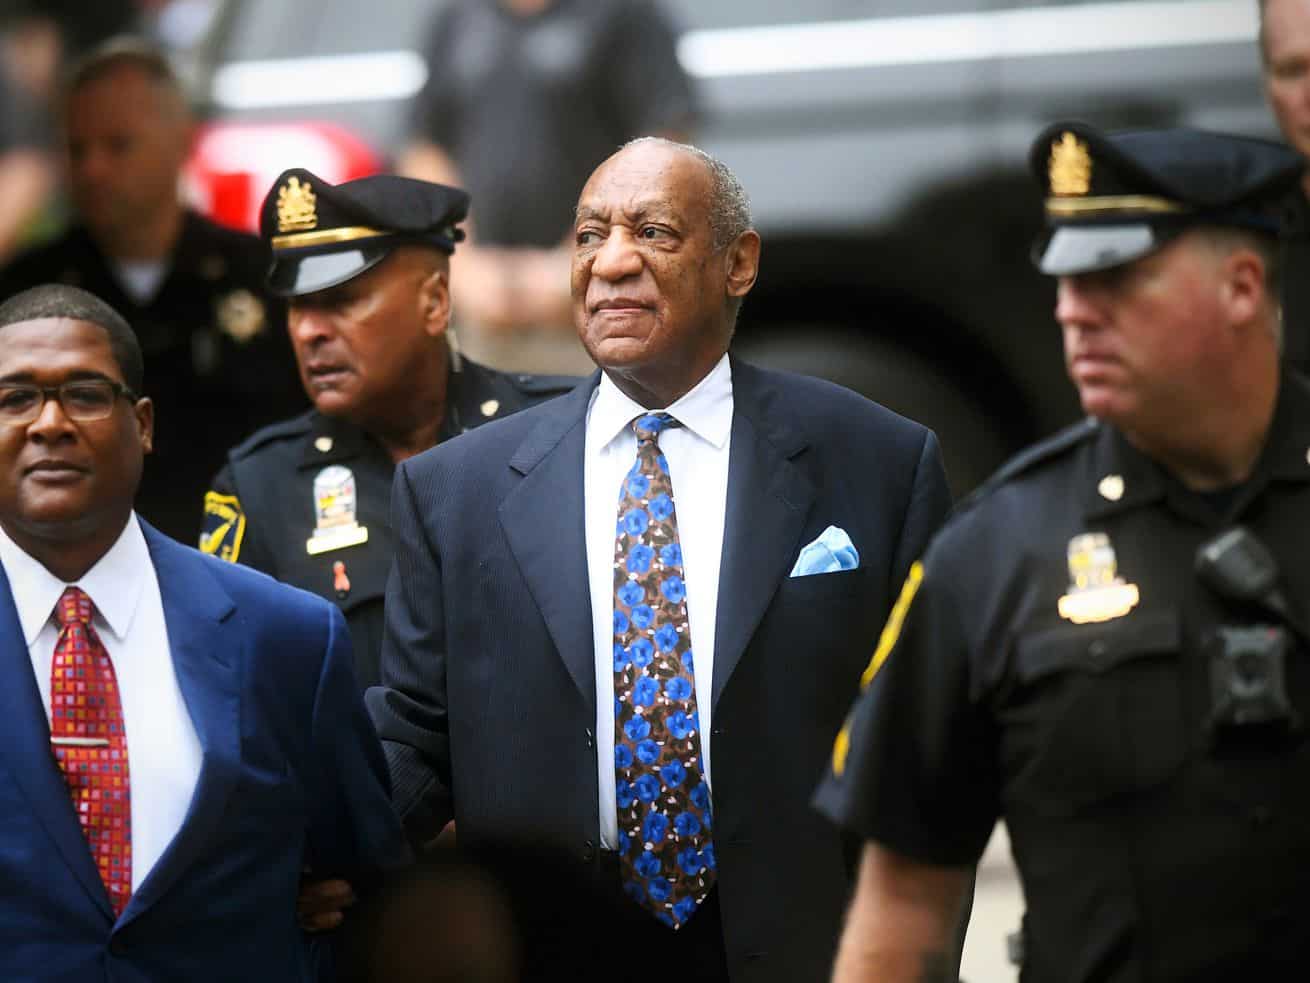 The court decision freeing Bill Cosby, explained as best we can